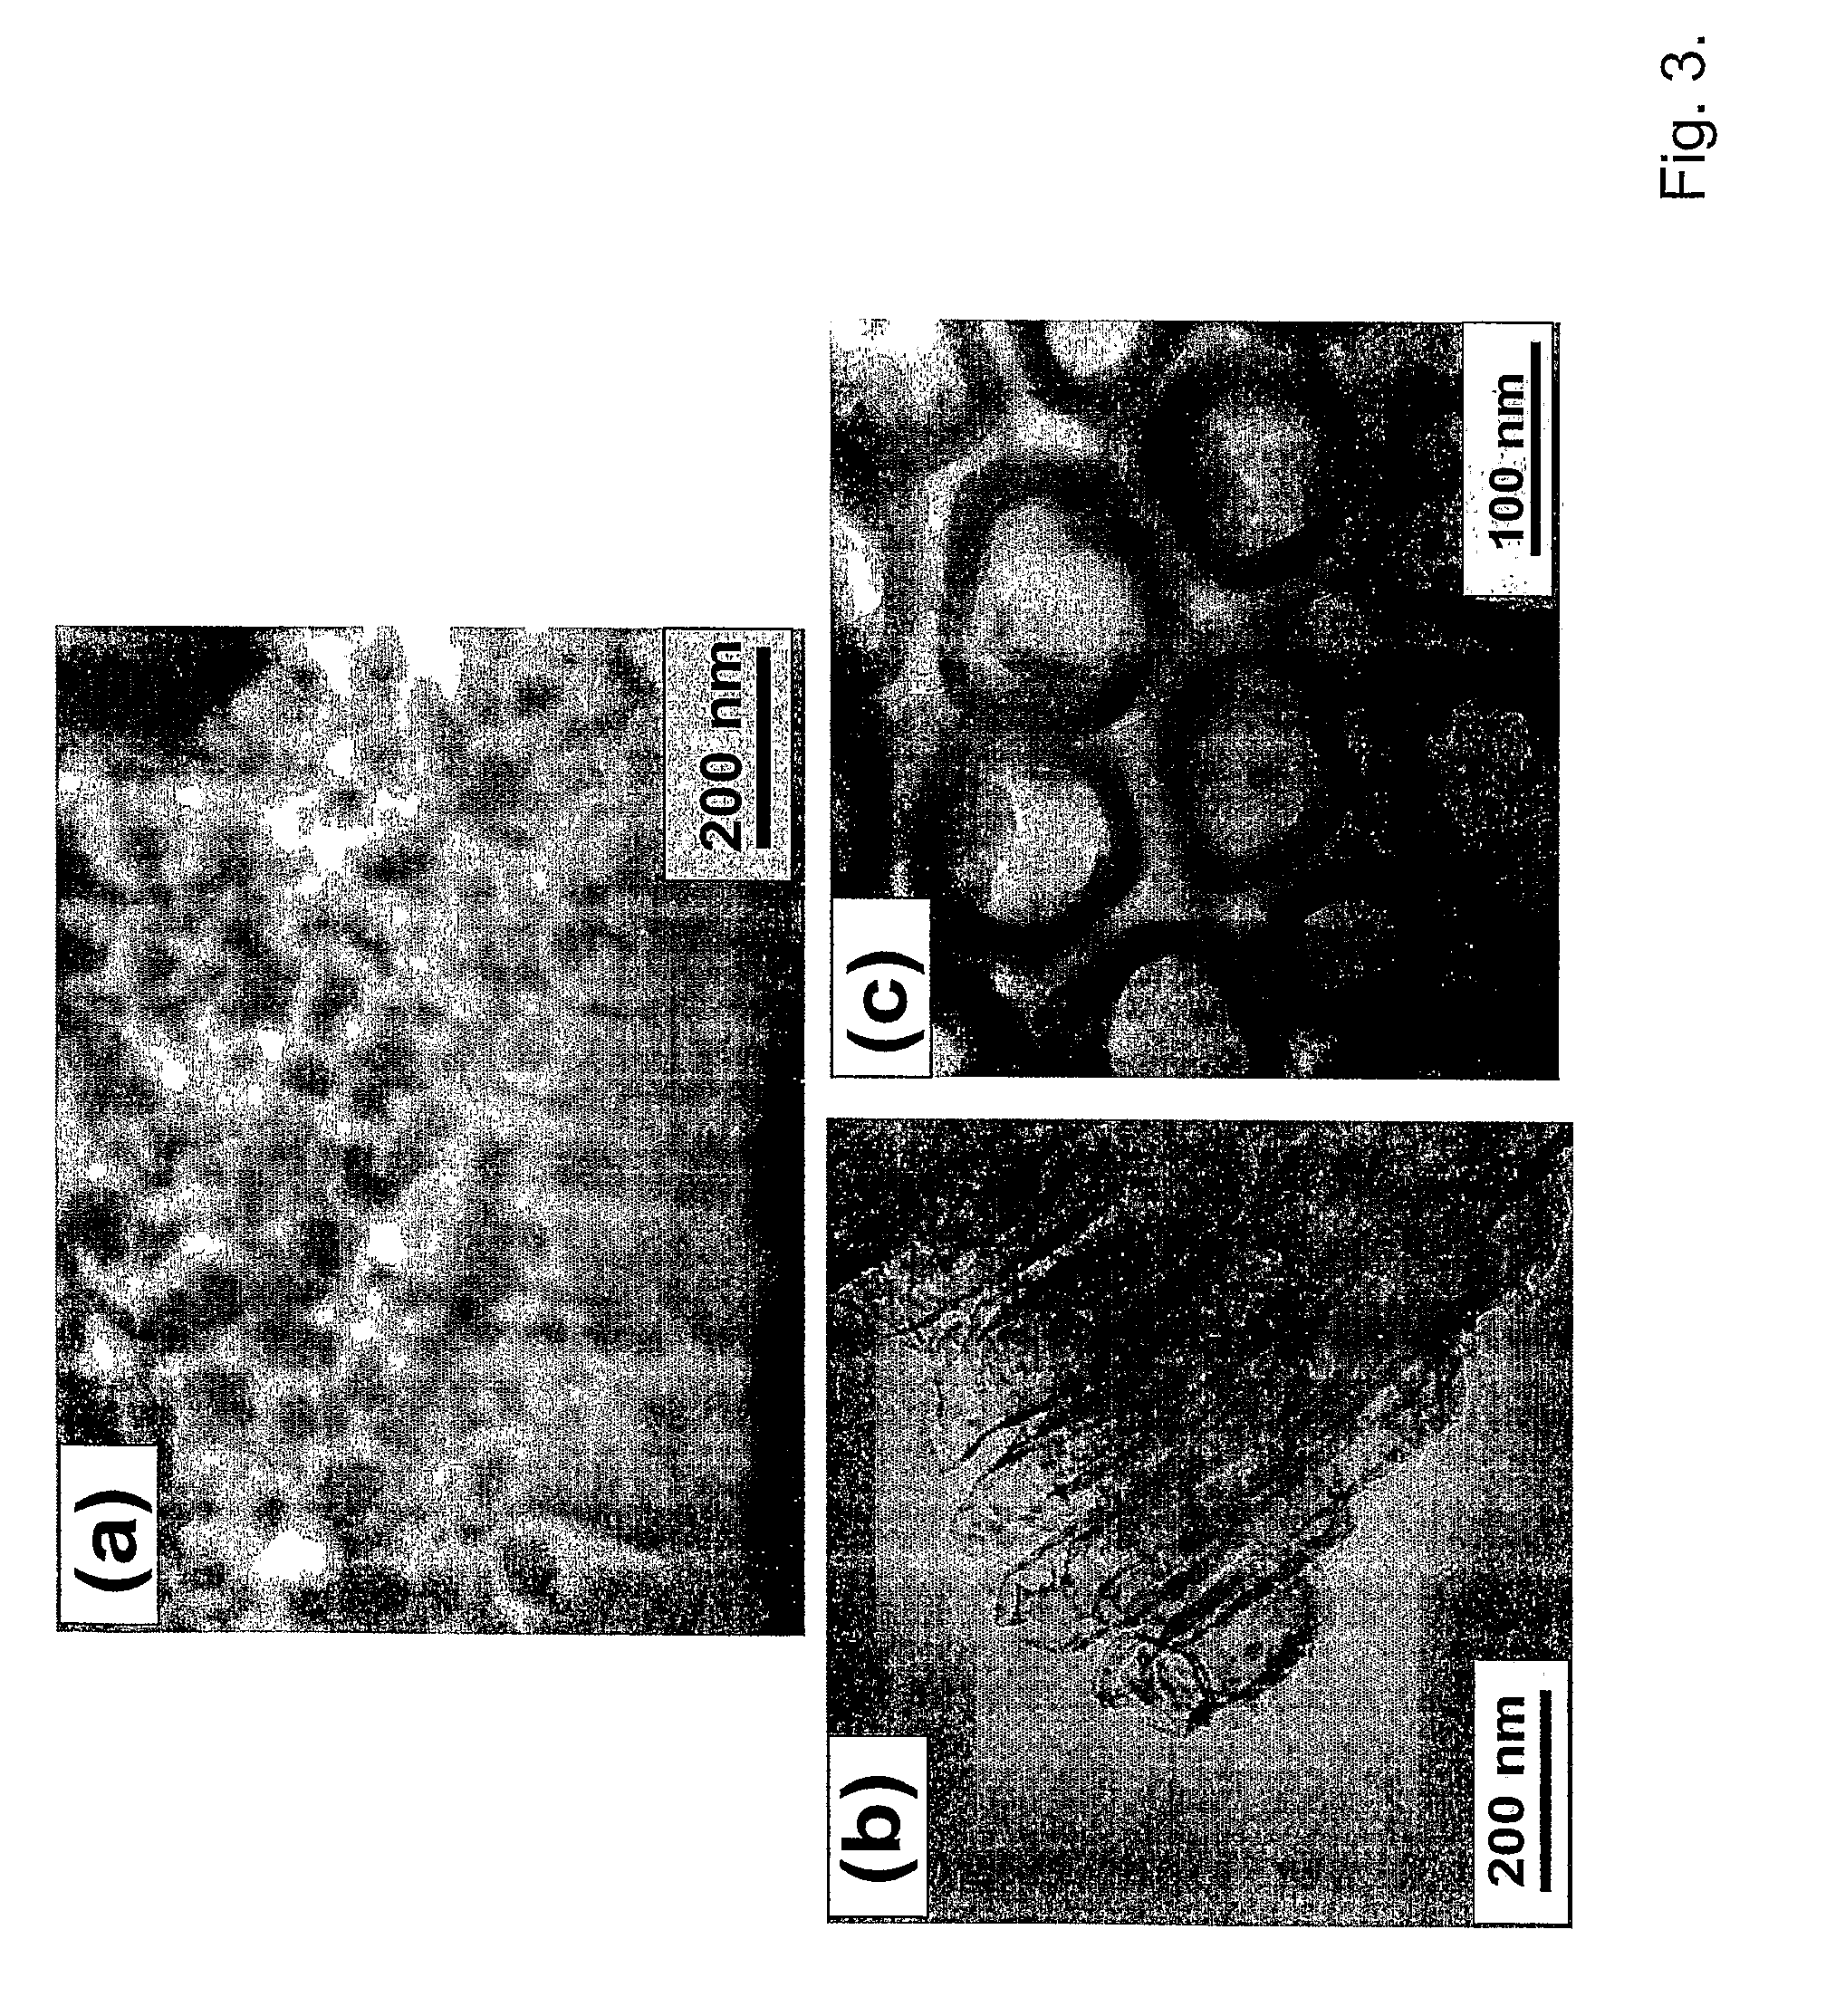 Compositions comprising nanostructures for cell, tissue and artificial organ growth, and methods for making and using same